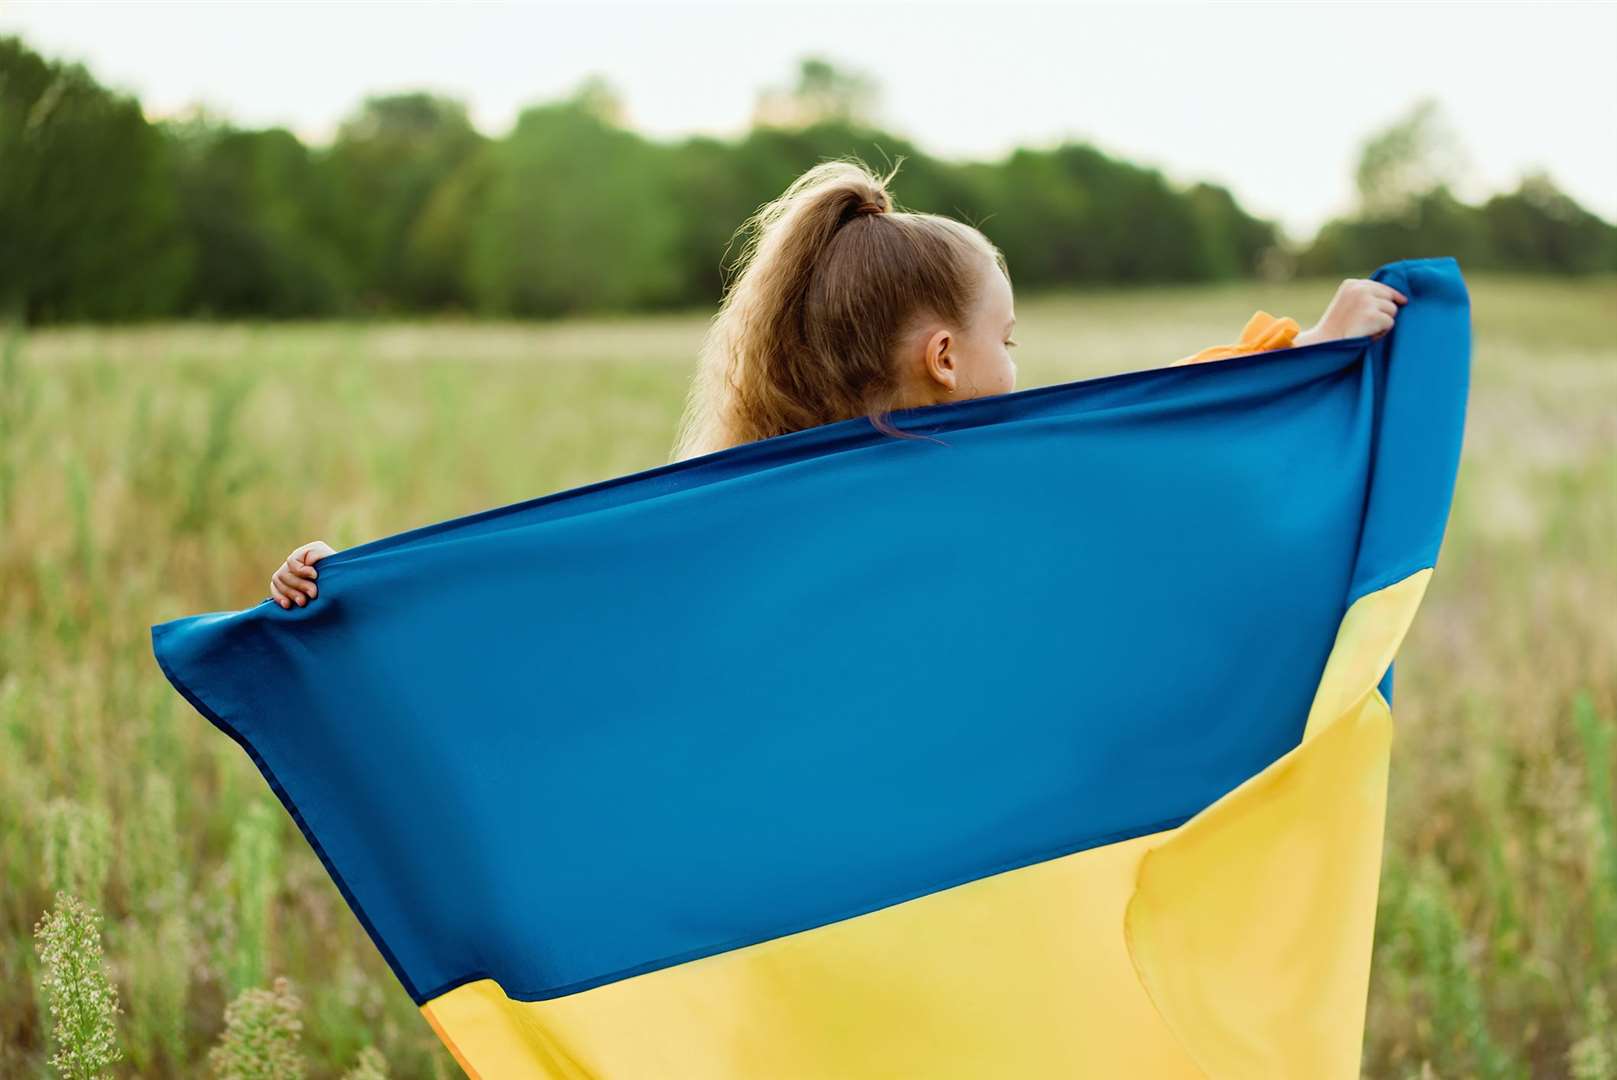 A Ukrainian child with her national flag. Image: istock